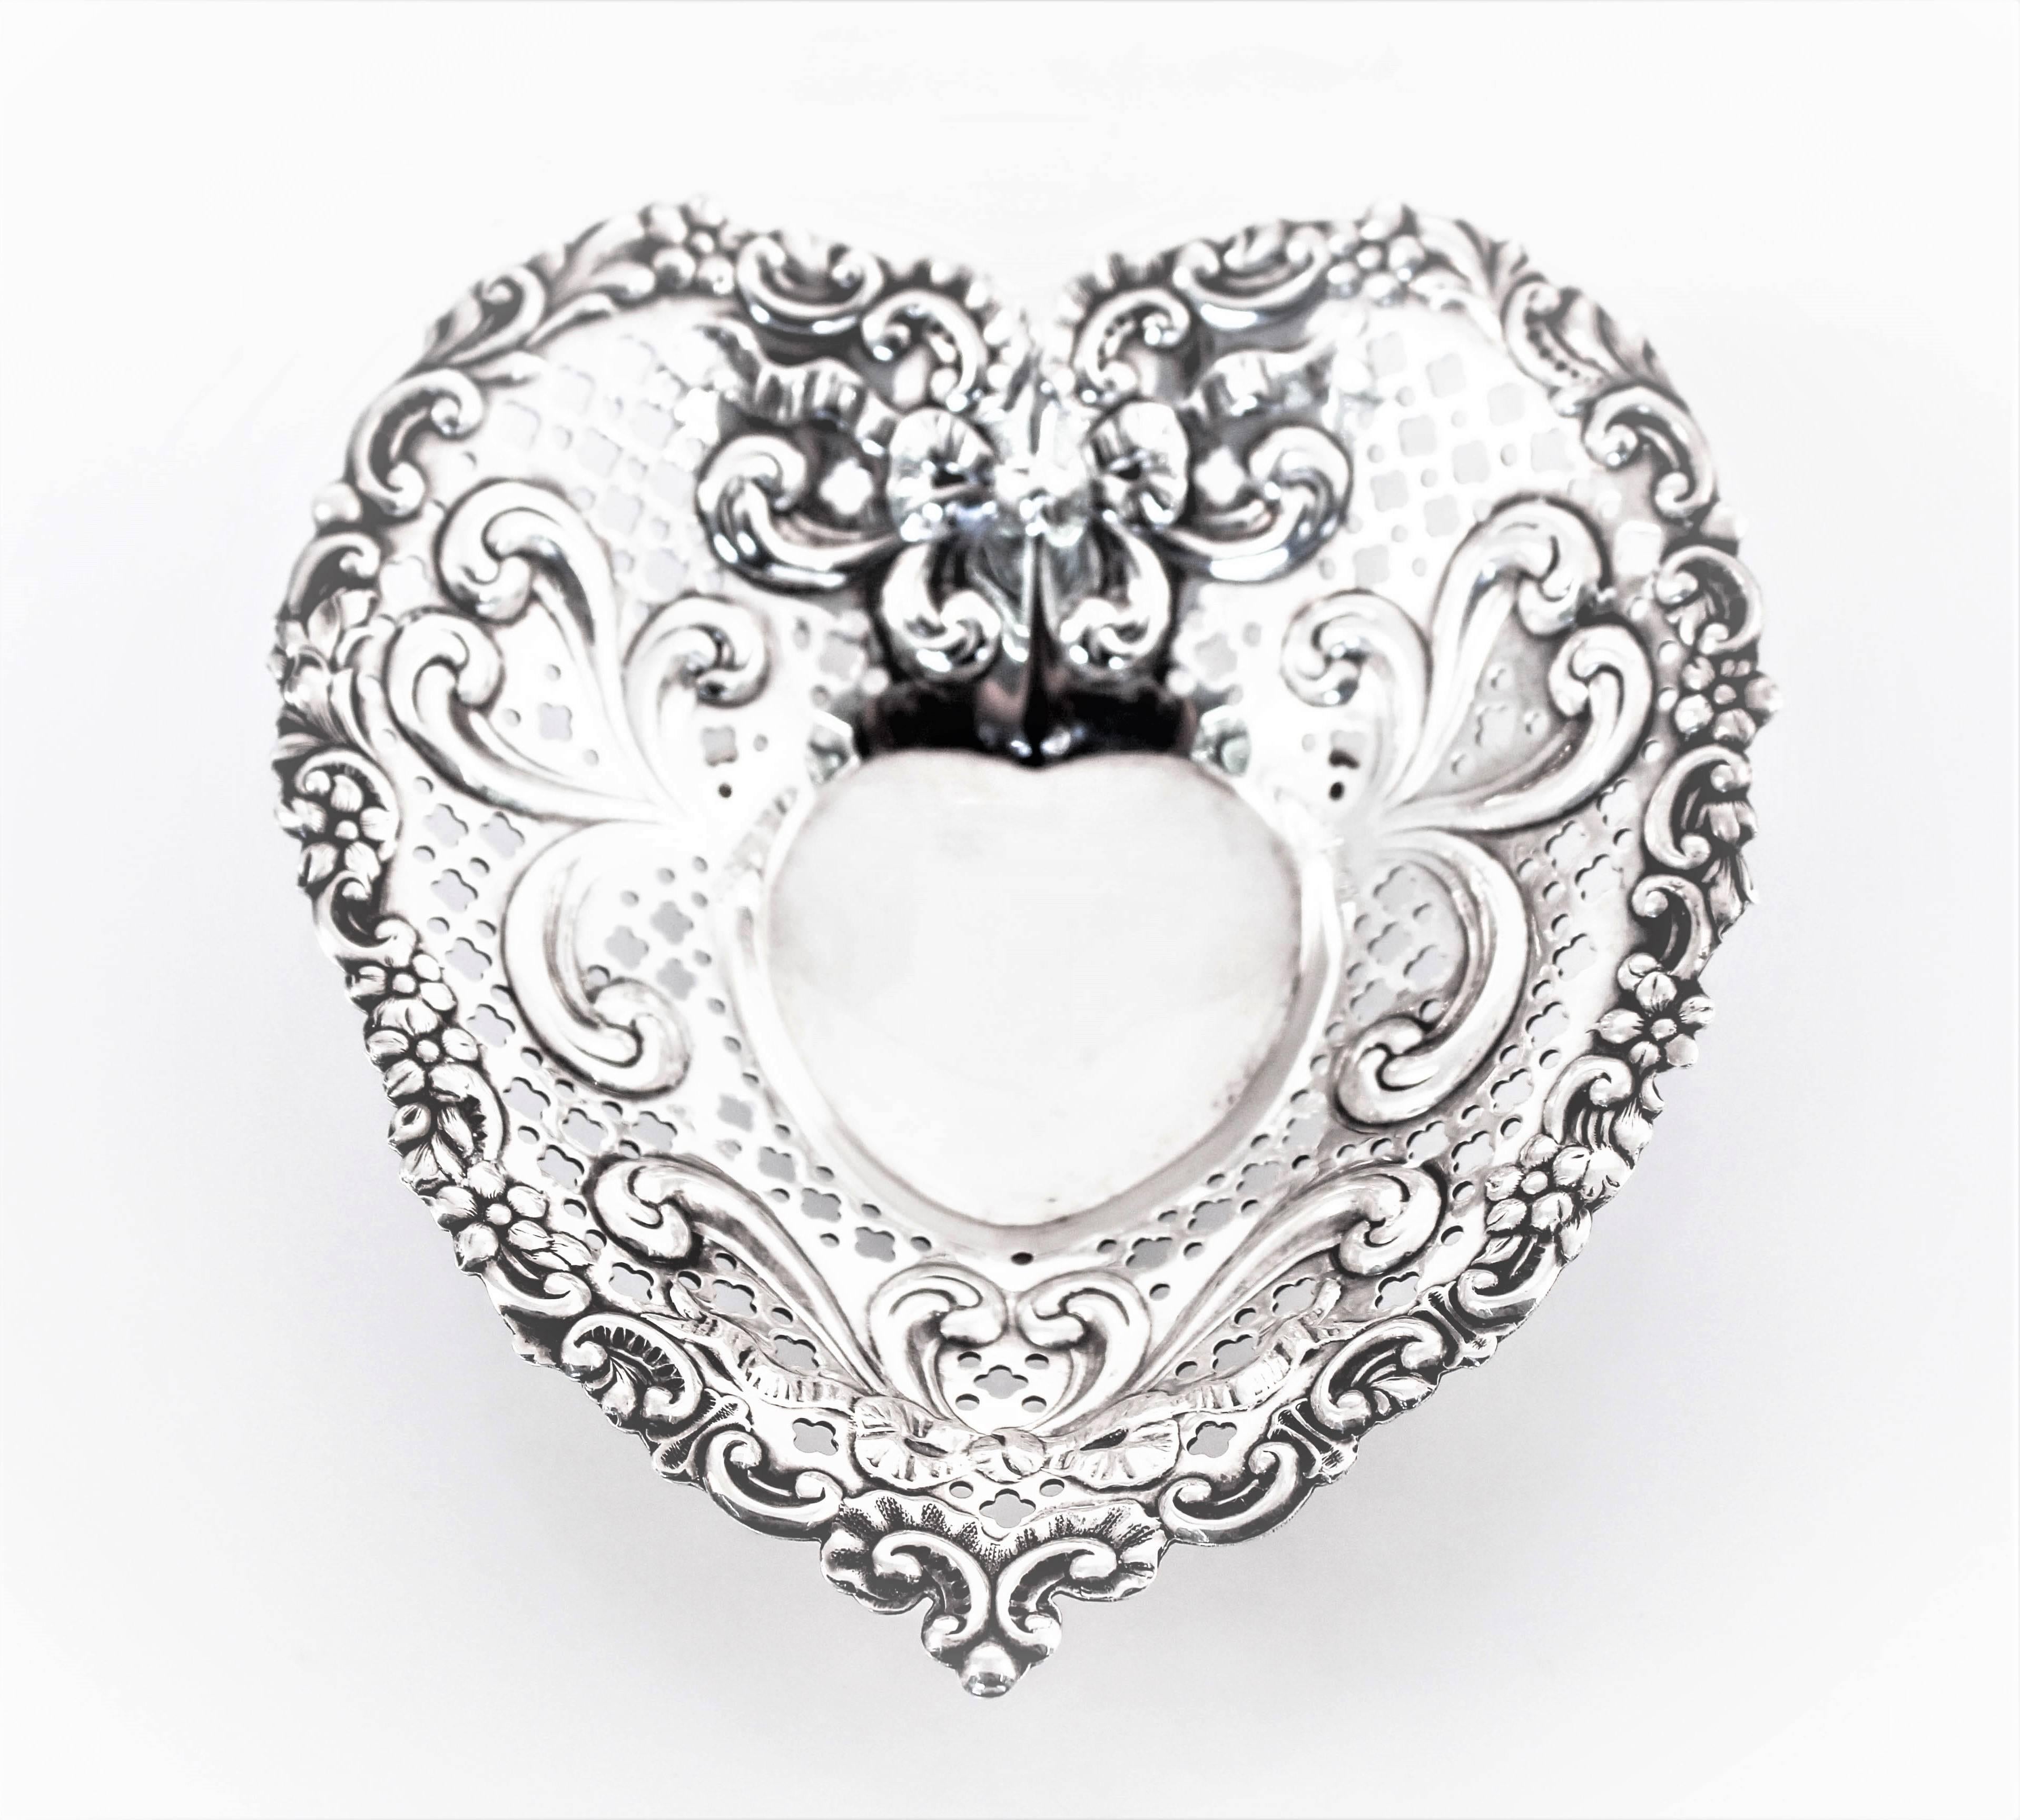 You don’t need to wait until next Valentine’s Day to tell her how much you love her. Here’s a fabulous pair of candy dishes by the Gorham Co. So bridal and so dainty...heart shaped with raised bows and flowers against the lattice work. “Two hearts,